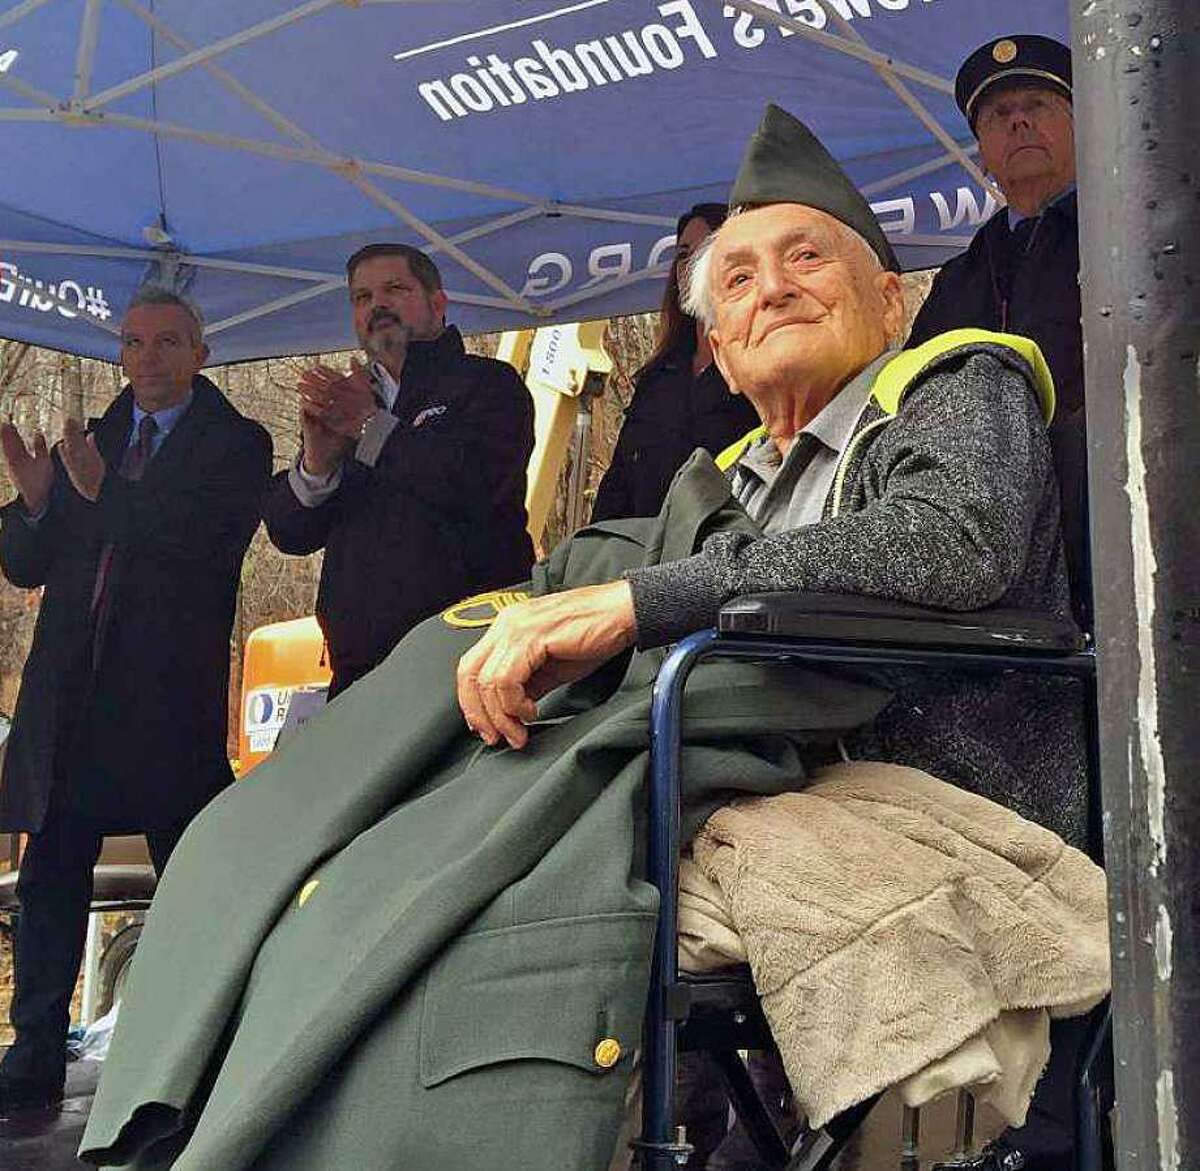 Lou Russo, a 97-year-old World War II veteran, was honored at his home on Hammond Road in New Fairfield in 2015.